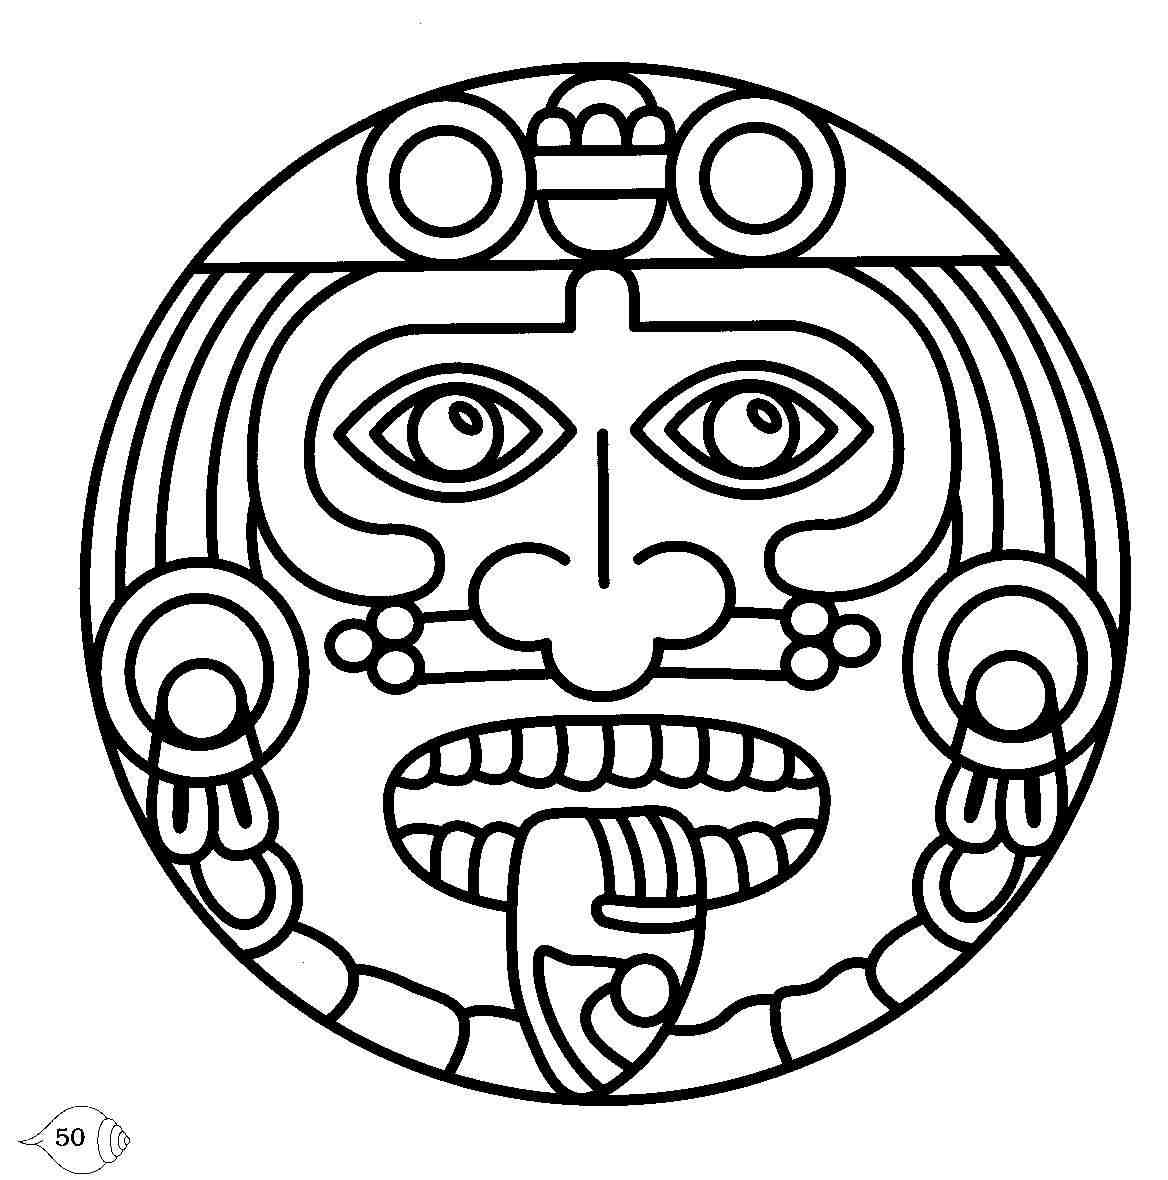 Ancient Aztec Image Design Water Transfer Temporary Tattoo(fake Tattoo) Stickers NO.11018